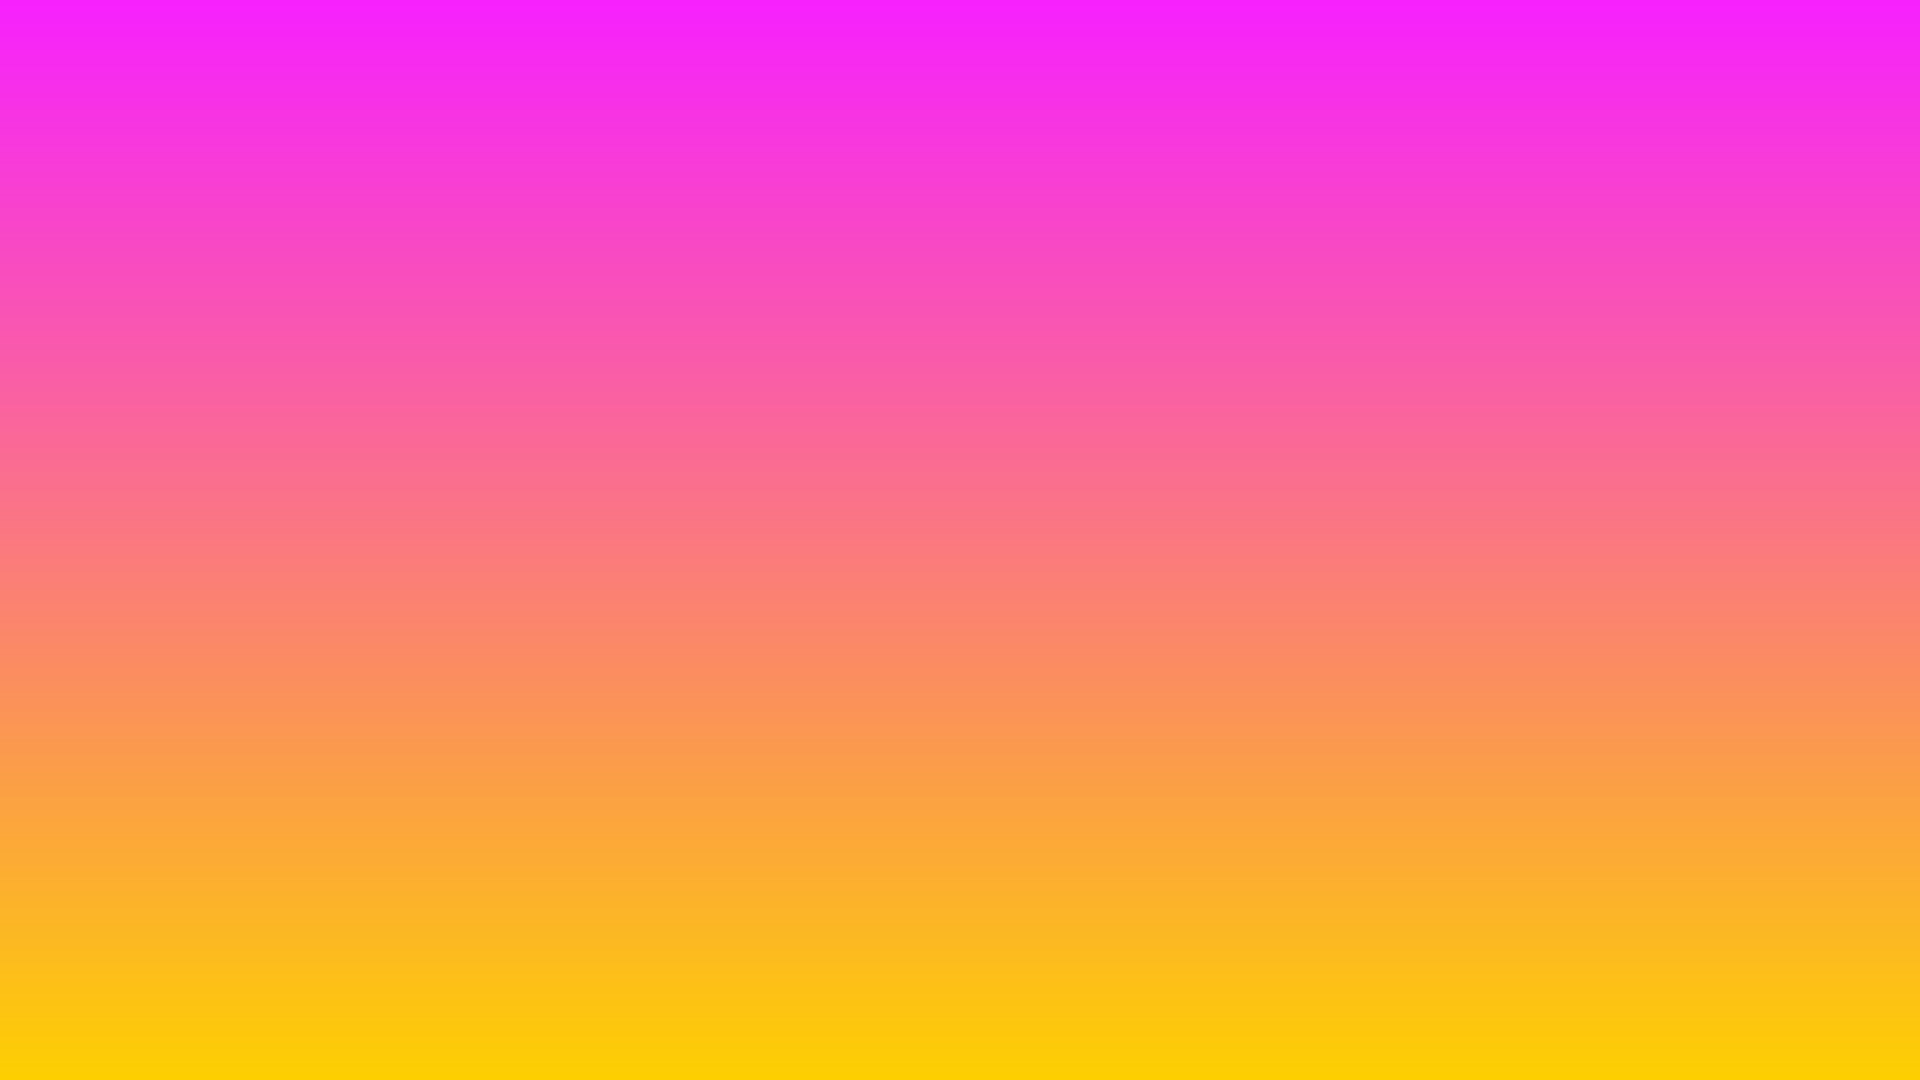 Unique & colorful Pink and yellow gradient background design ideas